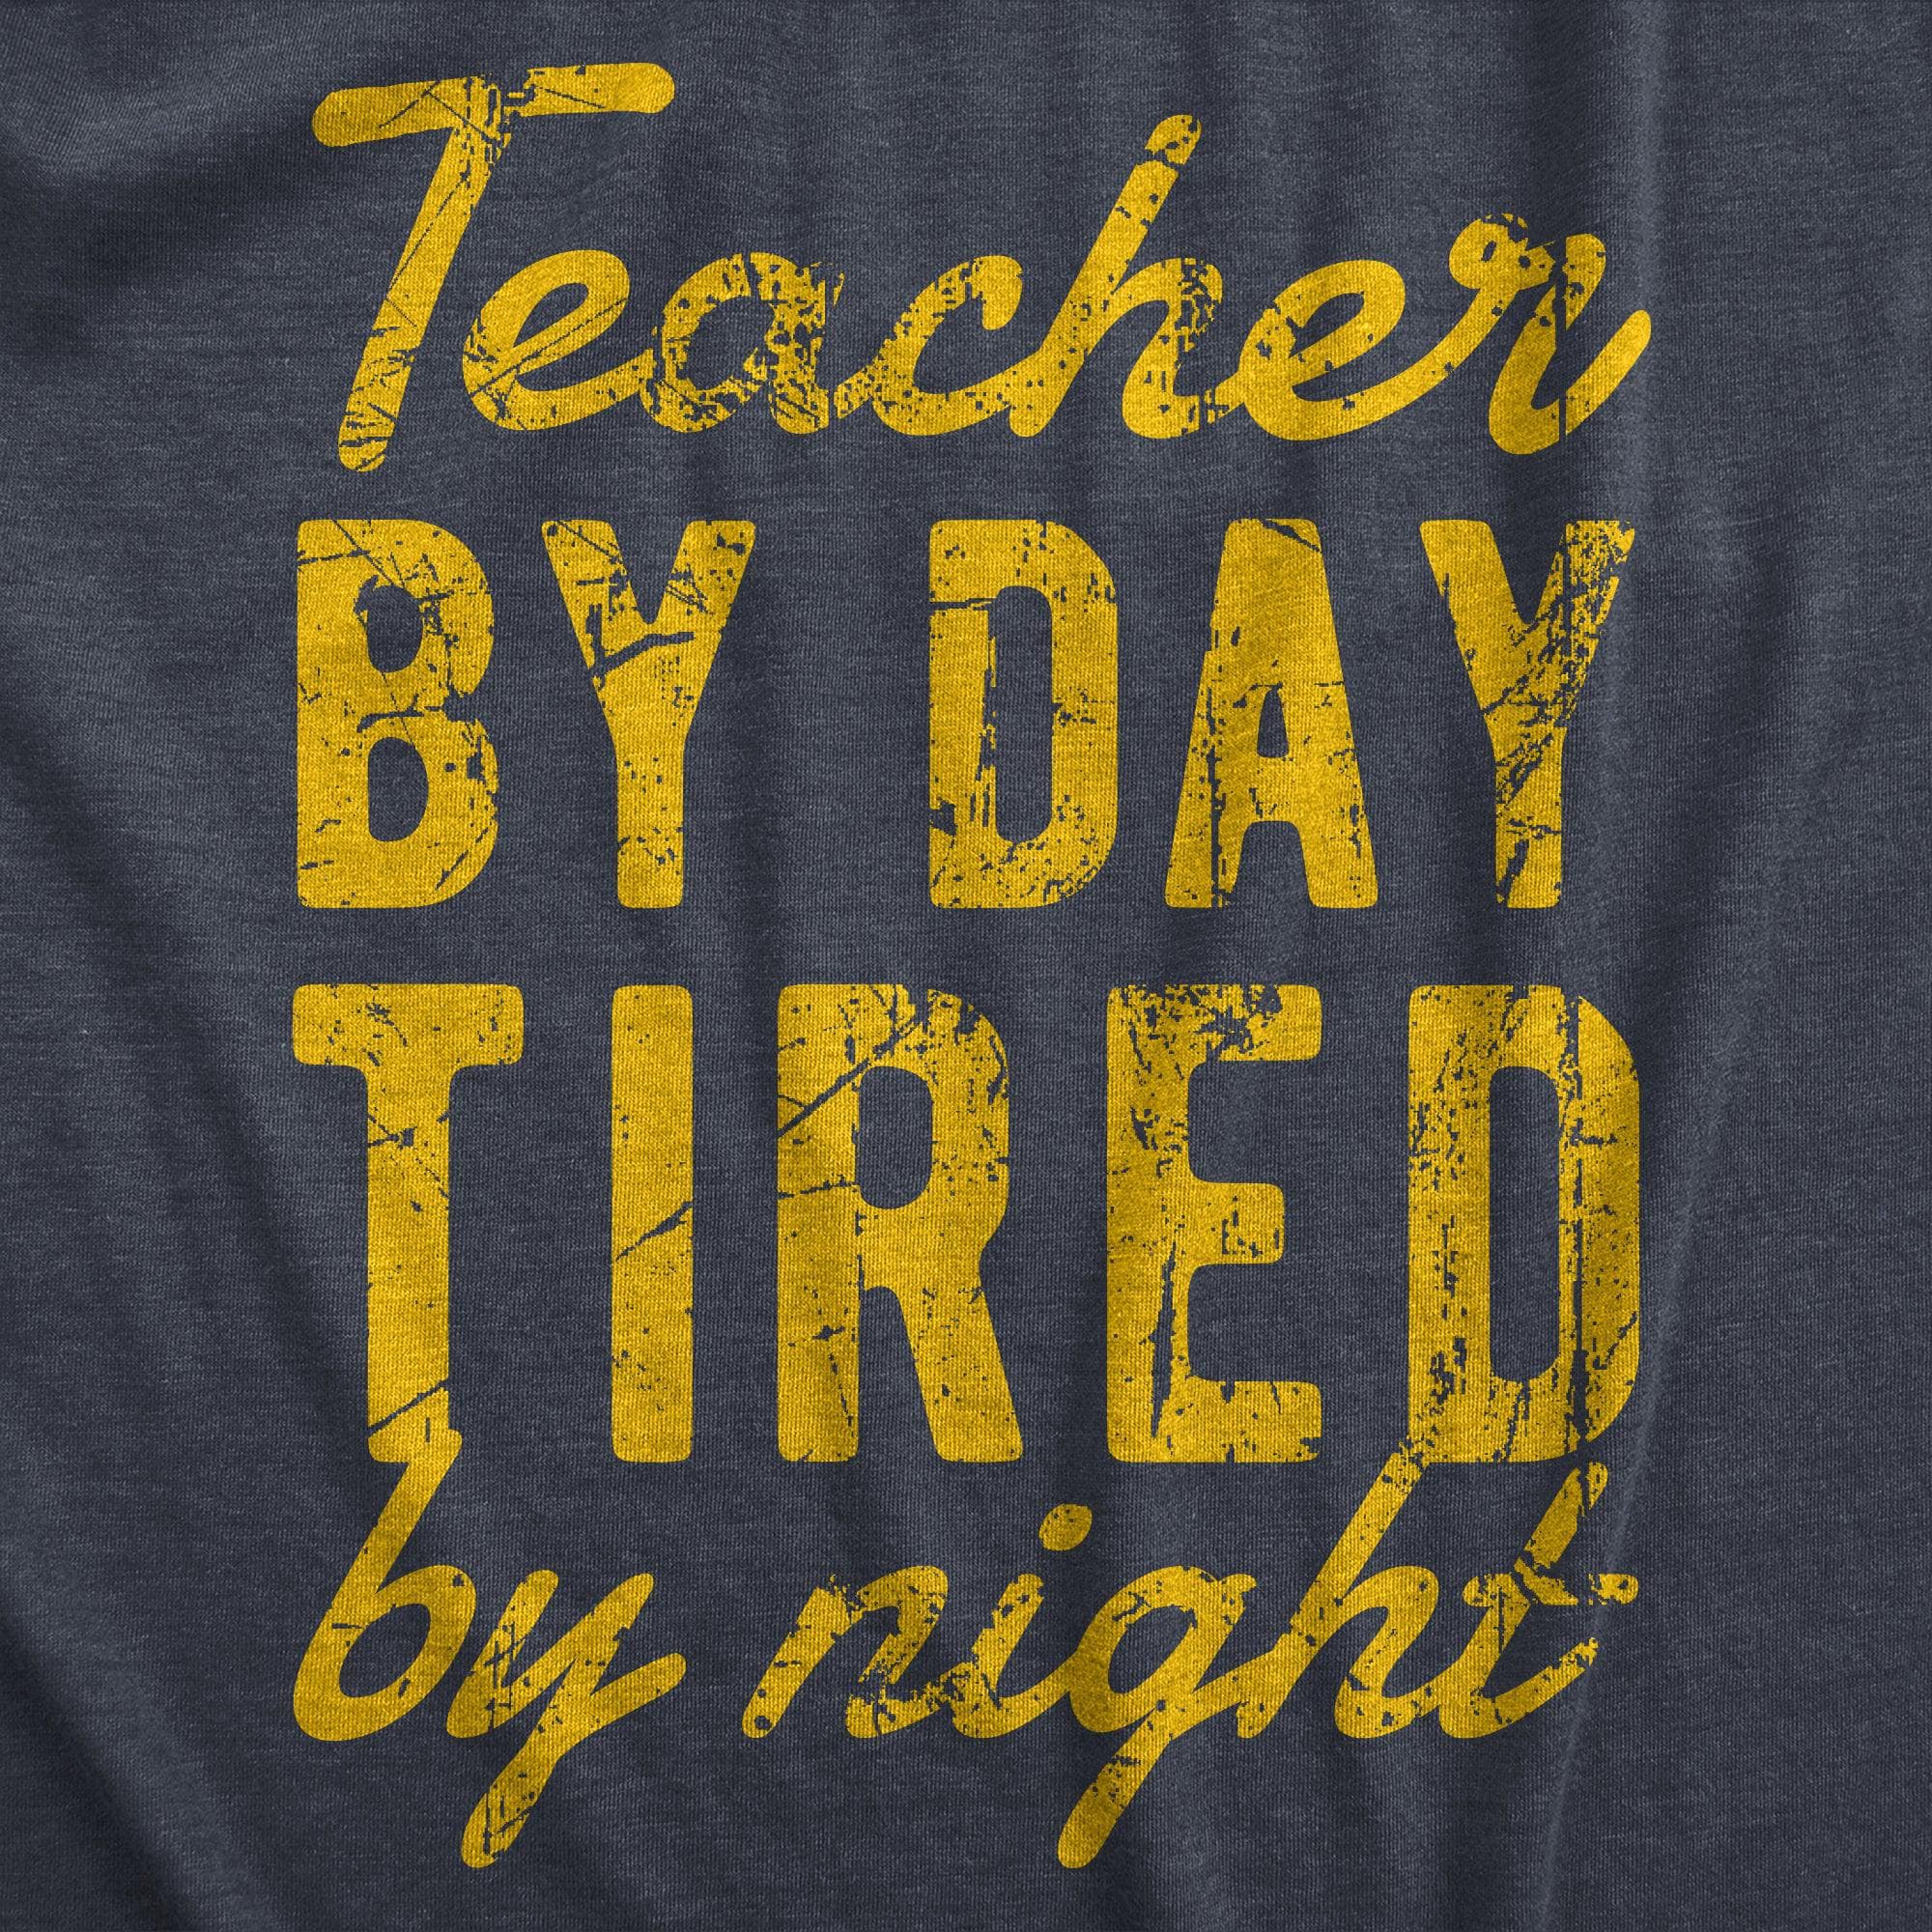 Teacher By Day Tired By Night Men's Tshirt  -  Crazy Dog T-Shirts